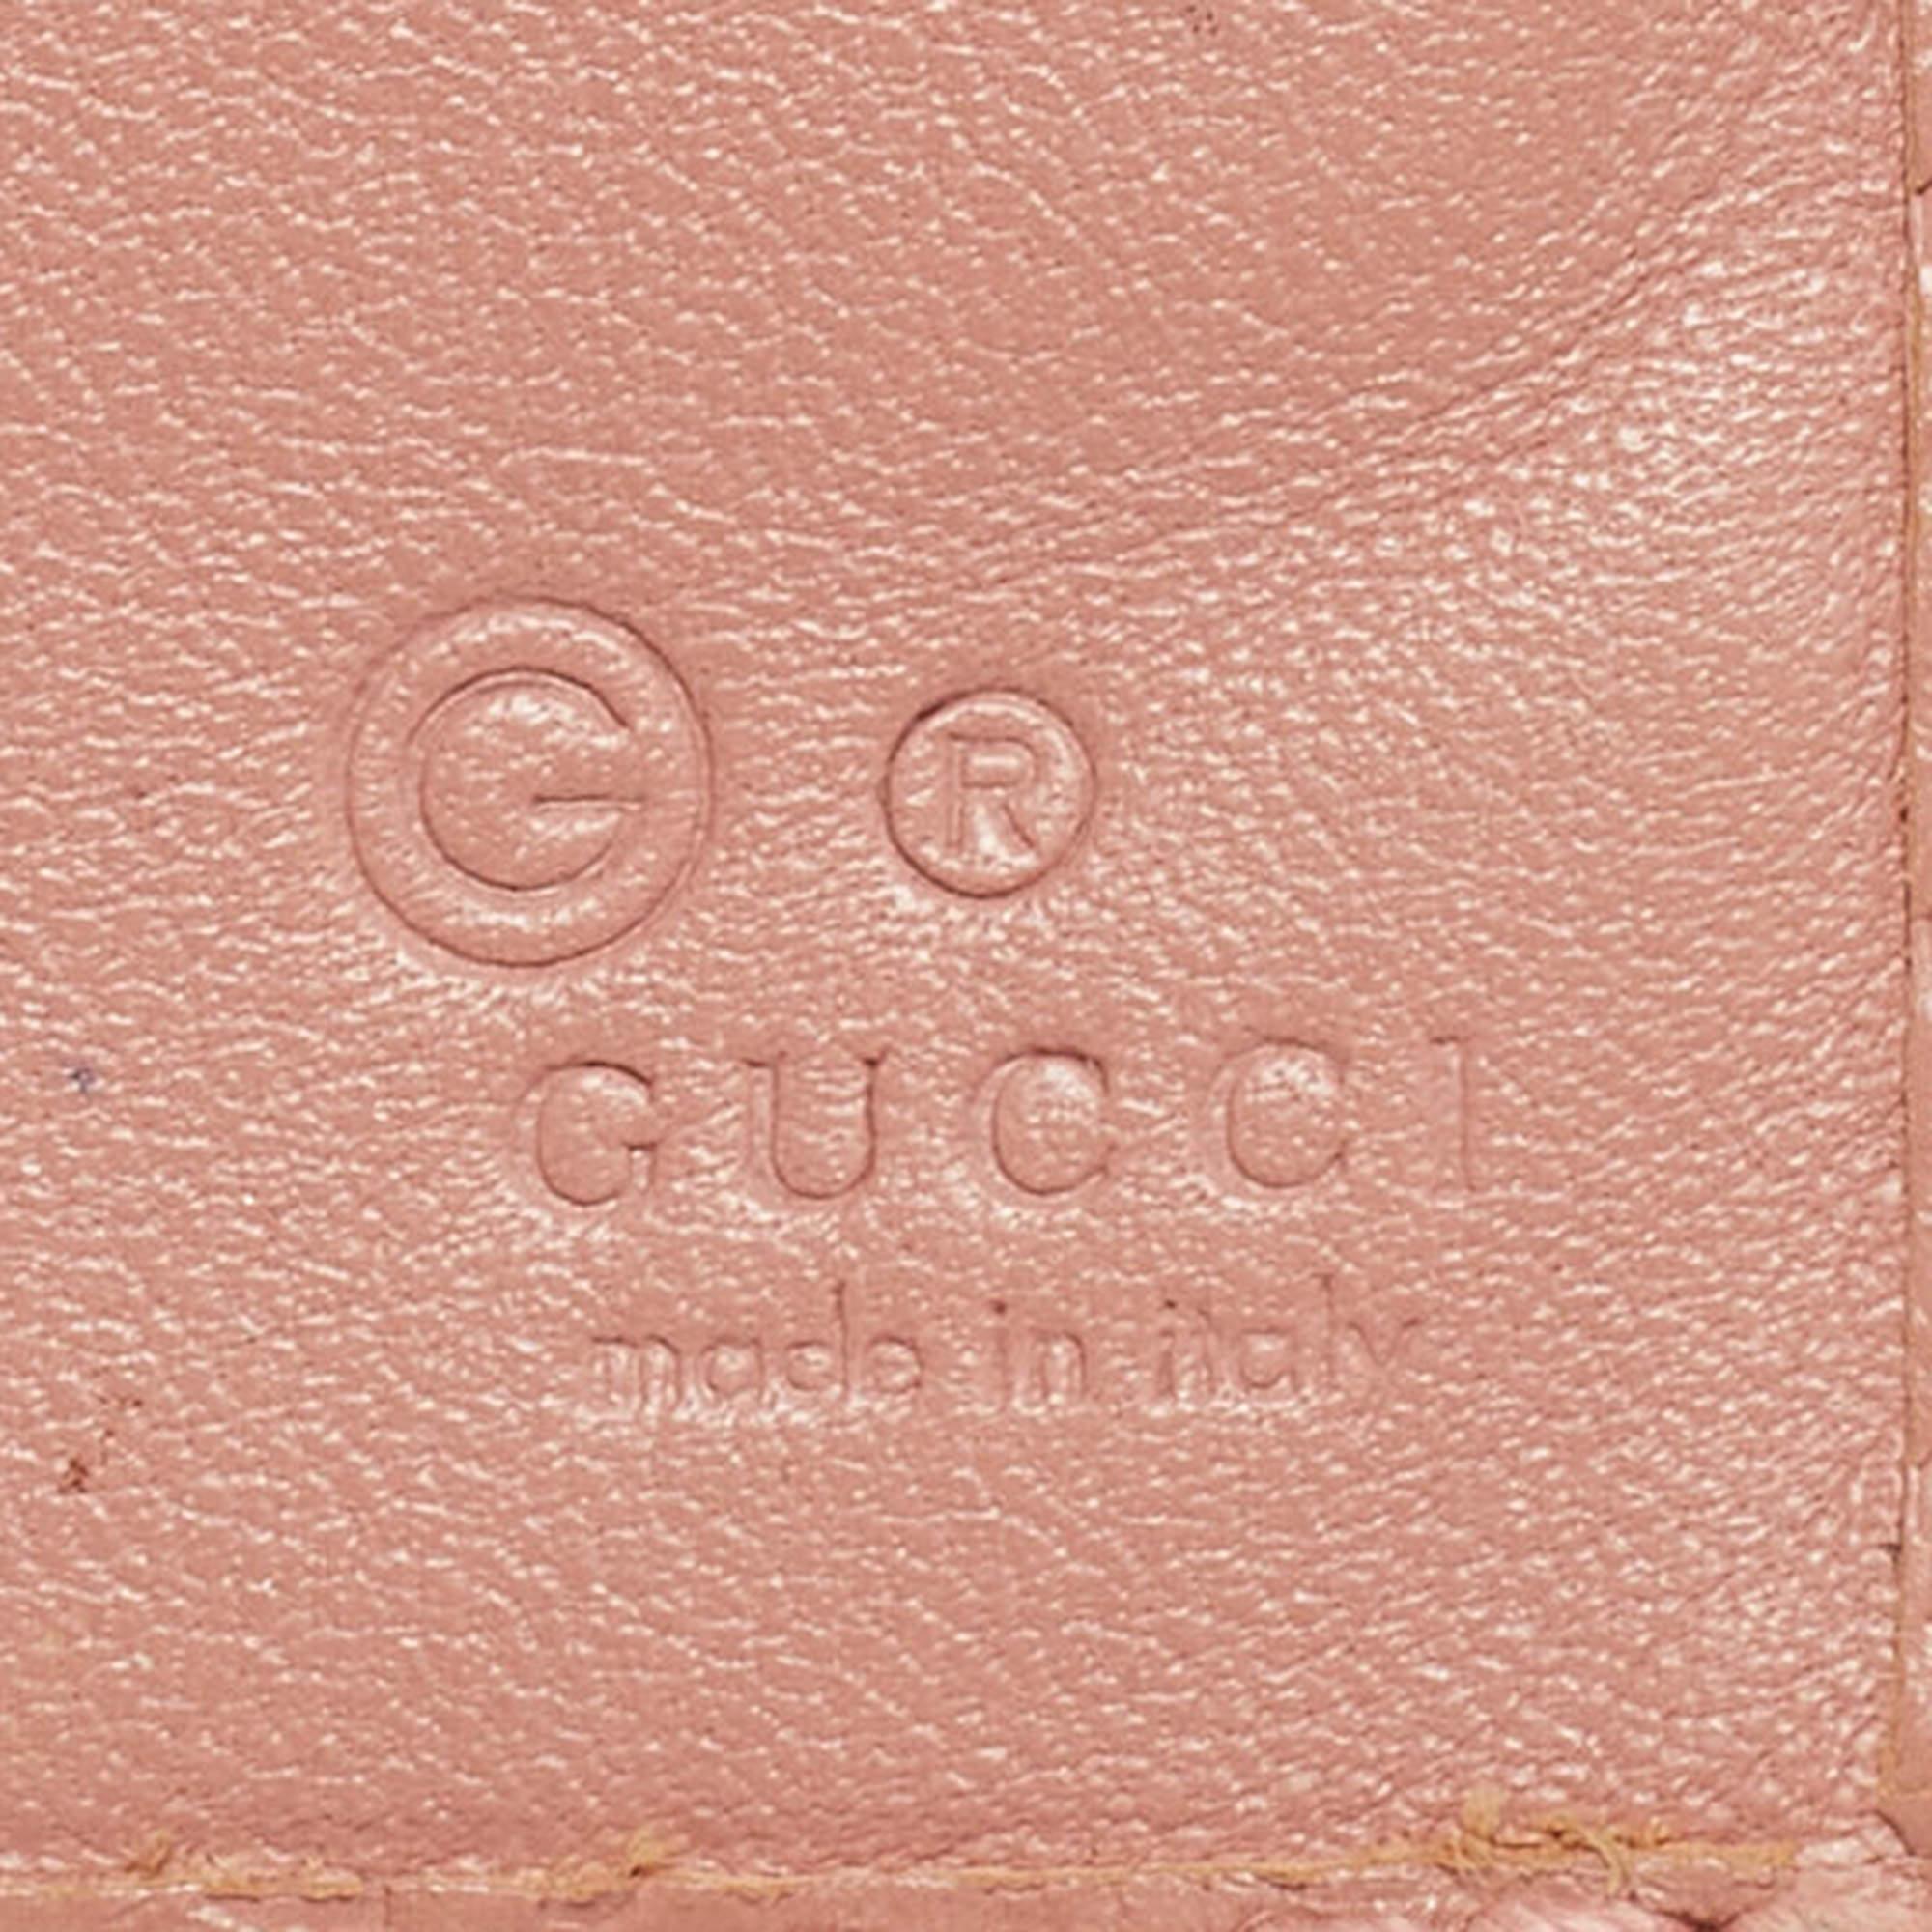 Gucci Pink Microgucissima Leather Flap Continental Wallet For Sale 6